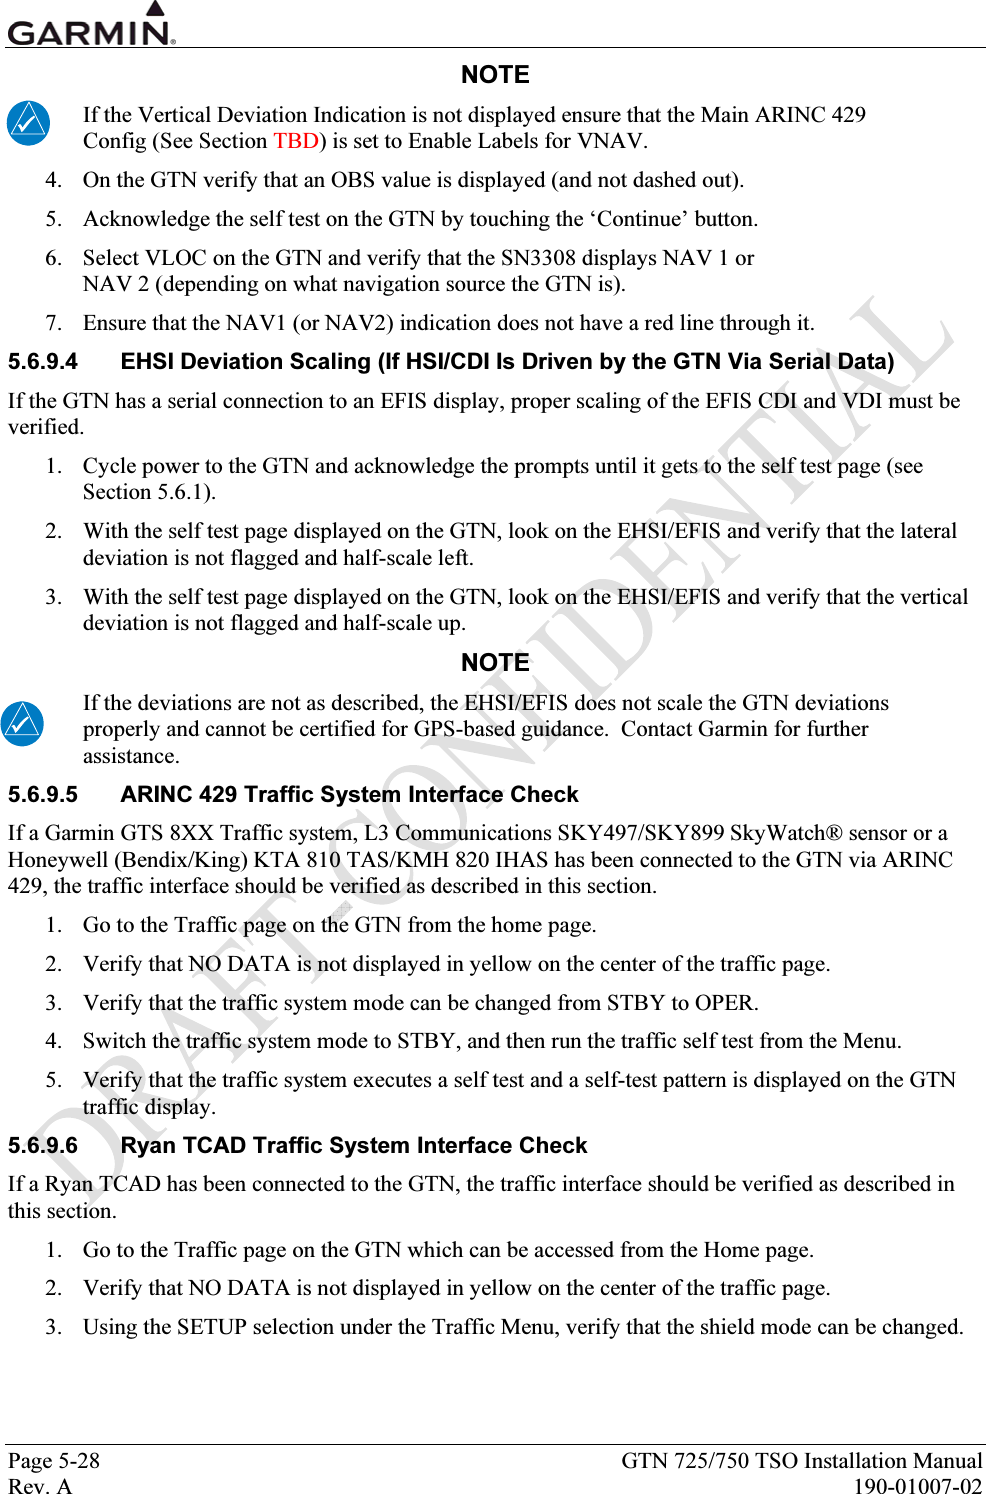  Page 5-28  GTN 725/750 TSO Installation Manual Rev. A  190-01007-02 NOTE If the Vertical Deviation Indication is not displayed ensure that the Main ARINC 429 Config (See Section TBD) is set to Enable Labels for VNAV. 4. On the GTN verify that an OBS value is displayed (and not dashed out). 5. Acknowledge the self test on the GTN by touching the ‘Continue’ button. 6. Select VLOC on the GTN and verify that the SN3308 displays NAV 1 or  NAV 2 (depending on what navigation source the GTN is).  7. Ensure that the NAV1 (or NAV2) indication does not have a red line through it. 5.6.9.4  EHSI Deviation Scaling (If HSI/CDI Is Driven by the GTN Via Serial Data) If the GTN has a serial connection to an EFIS display, proper scaling of the EFIS CDI and VDI must be verified.   1. Cycle power to the GTN and acknowledge the prompts until it gets to the self test page (see Section 5.6.1). 2. With the self test page displayed on the GTN, look on the EHSI/EFIS and verify that the lateral deviation is not flagged and half-scale left. 3. With the self test page displayed on the GTN, look on the EHSI/EFIS and verify that the vertical deviation is not flagged and half-scale up. NOTE If the deviations are not as described, the EHSI/EFIS does not scale the GTN deviations properly and cannot be certified for GPS-based guidance.  Contact Garmin for further assistance. 5.6.9.5  ARINC 429 Traffic System Interface Check If a Garmin GTS 8XX Traffic system, L3 Communications SKY497/SKY899 SkyWatch® sensor or a Honeywell (Bendix/King) KTA 810 TAS/KMH 820 IHAS has been connected to the GTN via ARINC 429, the traffic interface should be verified as described in this section. 1. Go to the Traffic page on the GTN from the home page. 2. Verify that NO DATA is not displayed in yellow on the center of the traffic page. 3. Verify that the traffic system mode can be changed from STBY to OPER. 4. Switch the traffic system mode to STBY, and then run the traffic self test from the Menu. 5. Verify that the traffic system executes a self test and a self-test pattern is displayed on the GTN traffic display. 5.6.9.6  Ryan TCAD Traffic System Interface Check If a Ryan TCAD has been connected to the GTN, the traffic interface should be verified as described in this section. 1. Go to the Traffic page on the GTN which can be accessed from the Home page. 2. Verify that NO DATA is not displayed in yellow on the center of the traffic page. 3. Using the SETUP selection under the Traffic Menu, verify that the shield mode can be changed. 